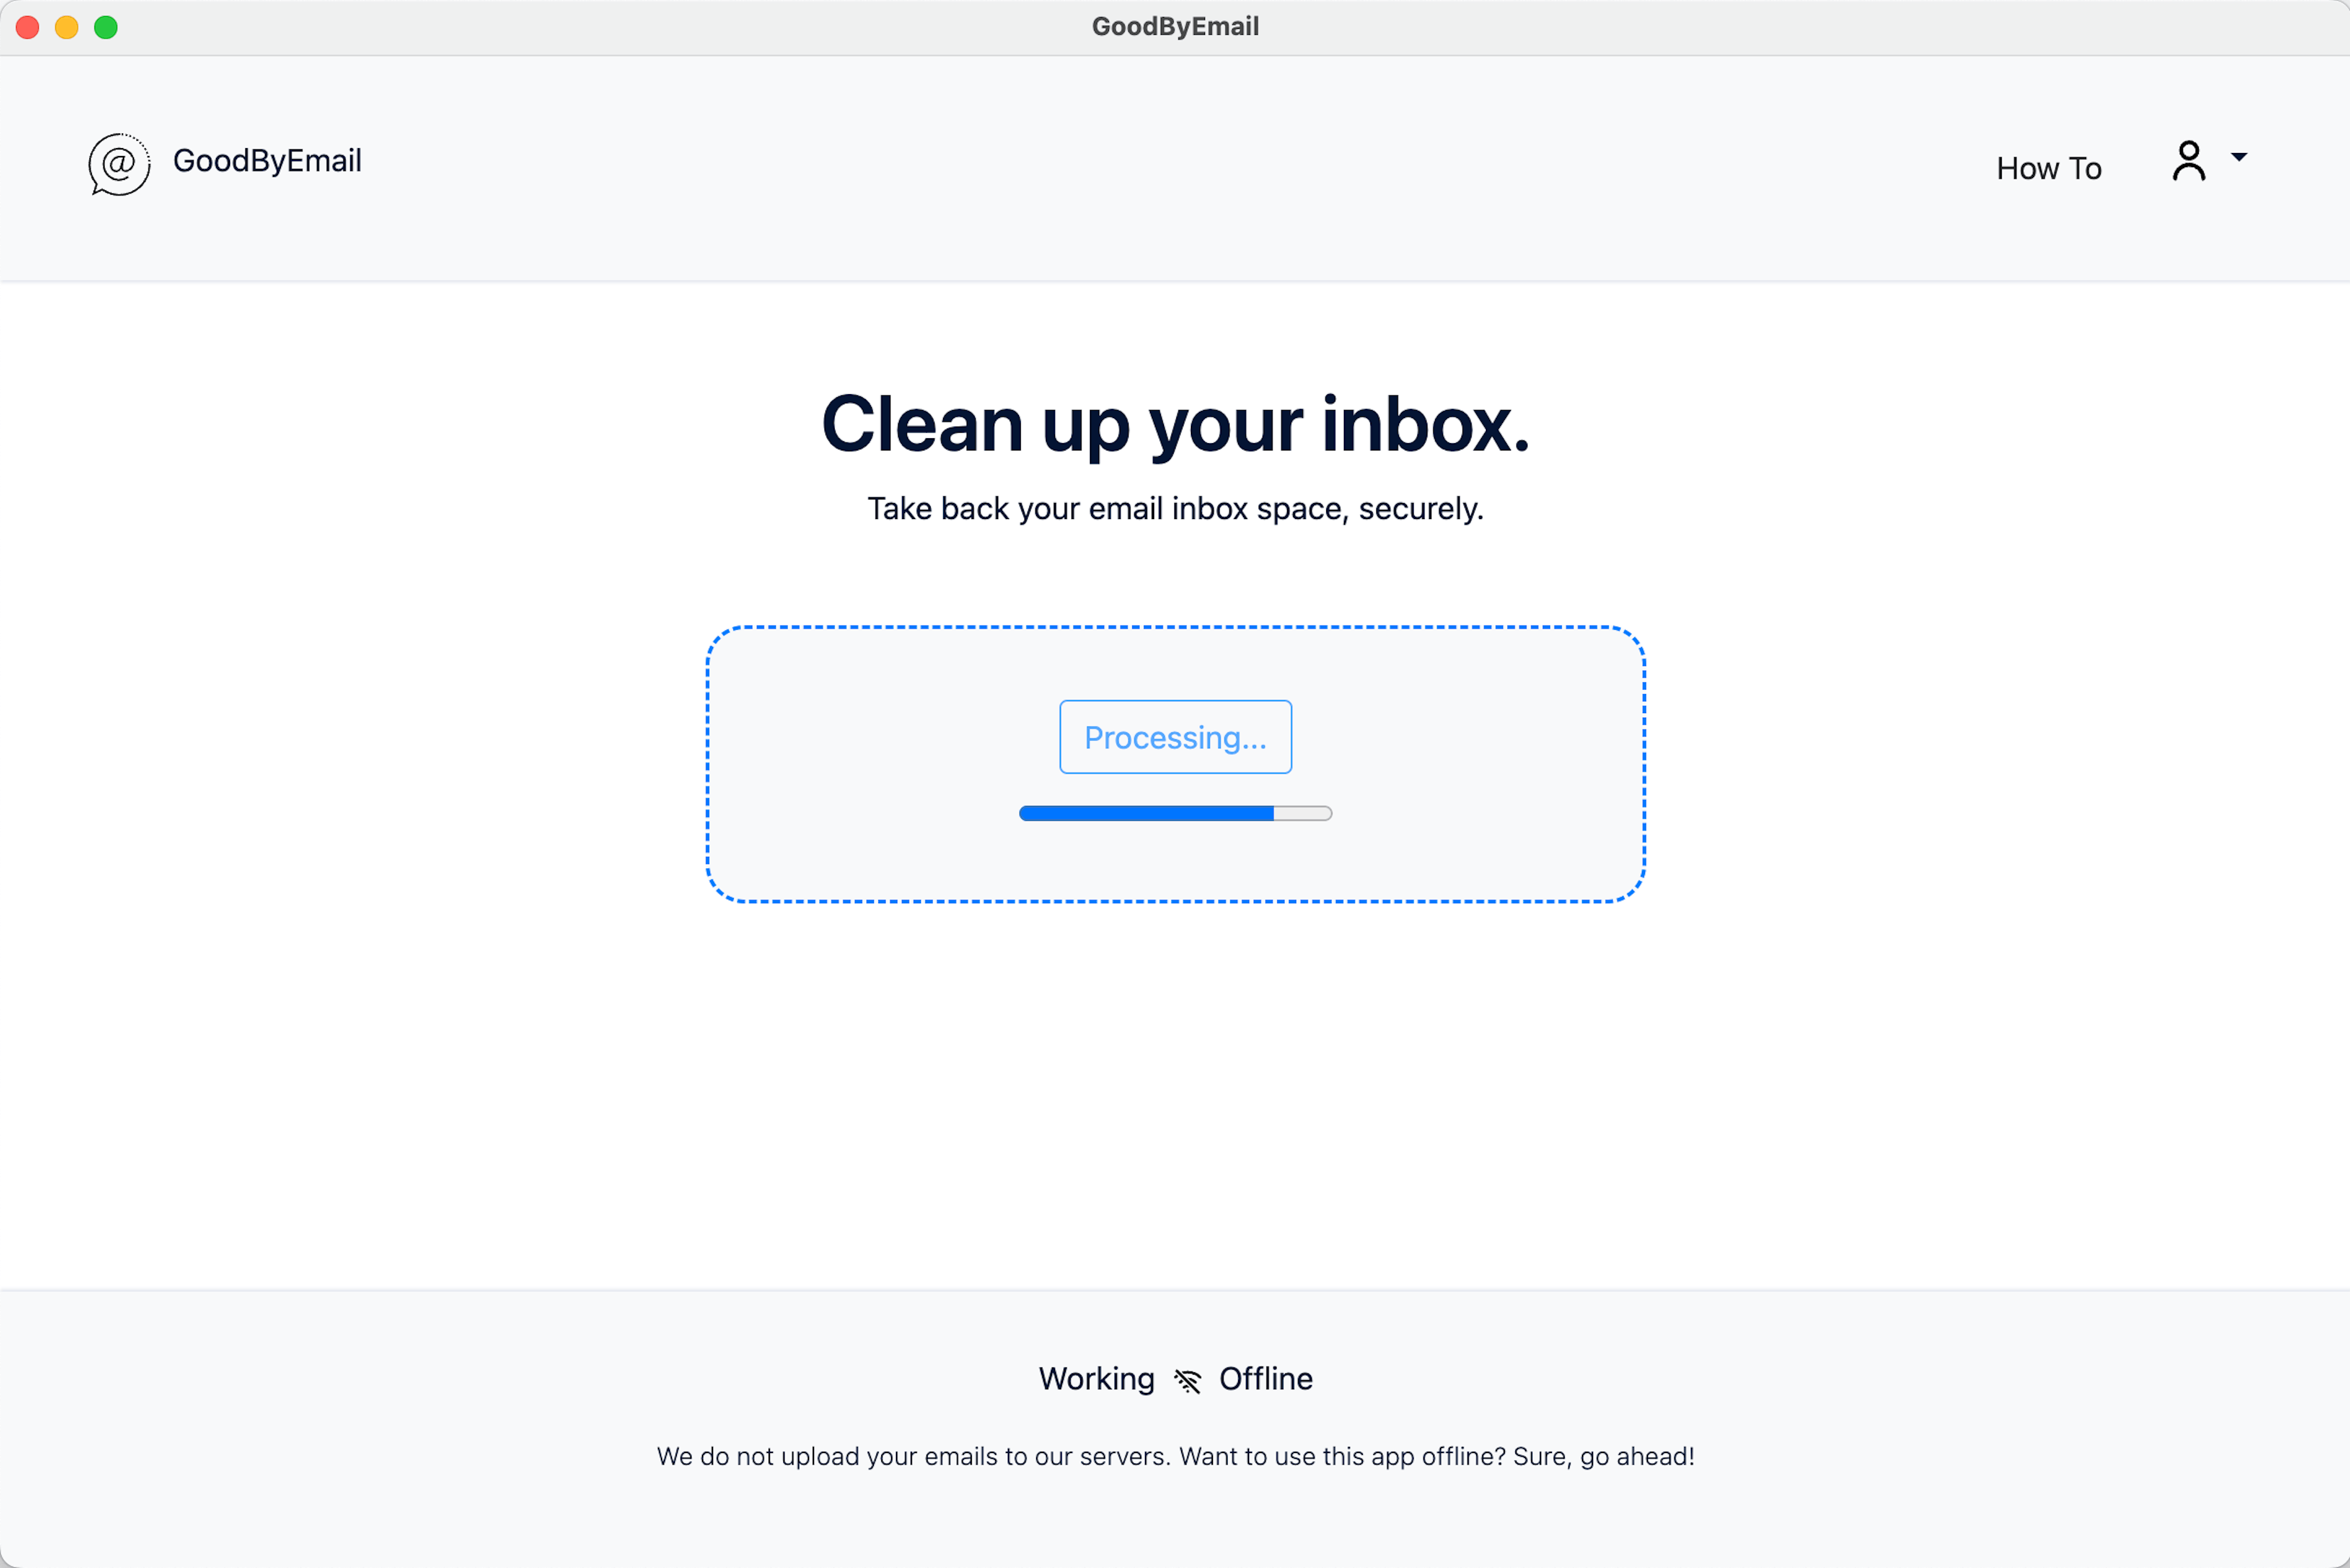 GoodByEmail is Privacy-First: Your Emails Never Leave Your Device